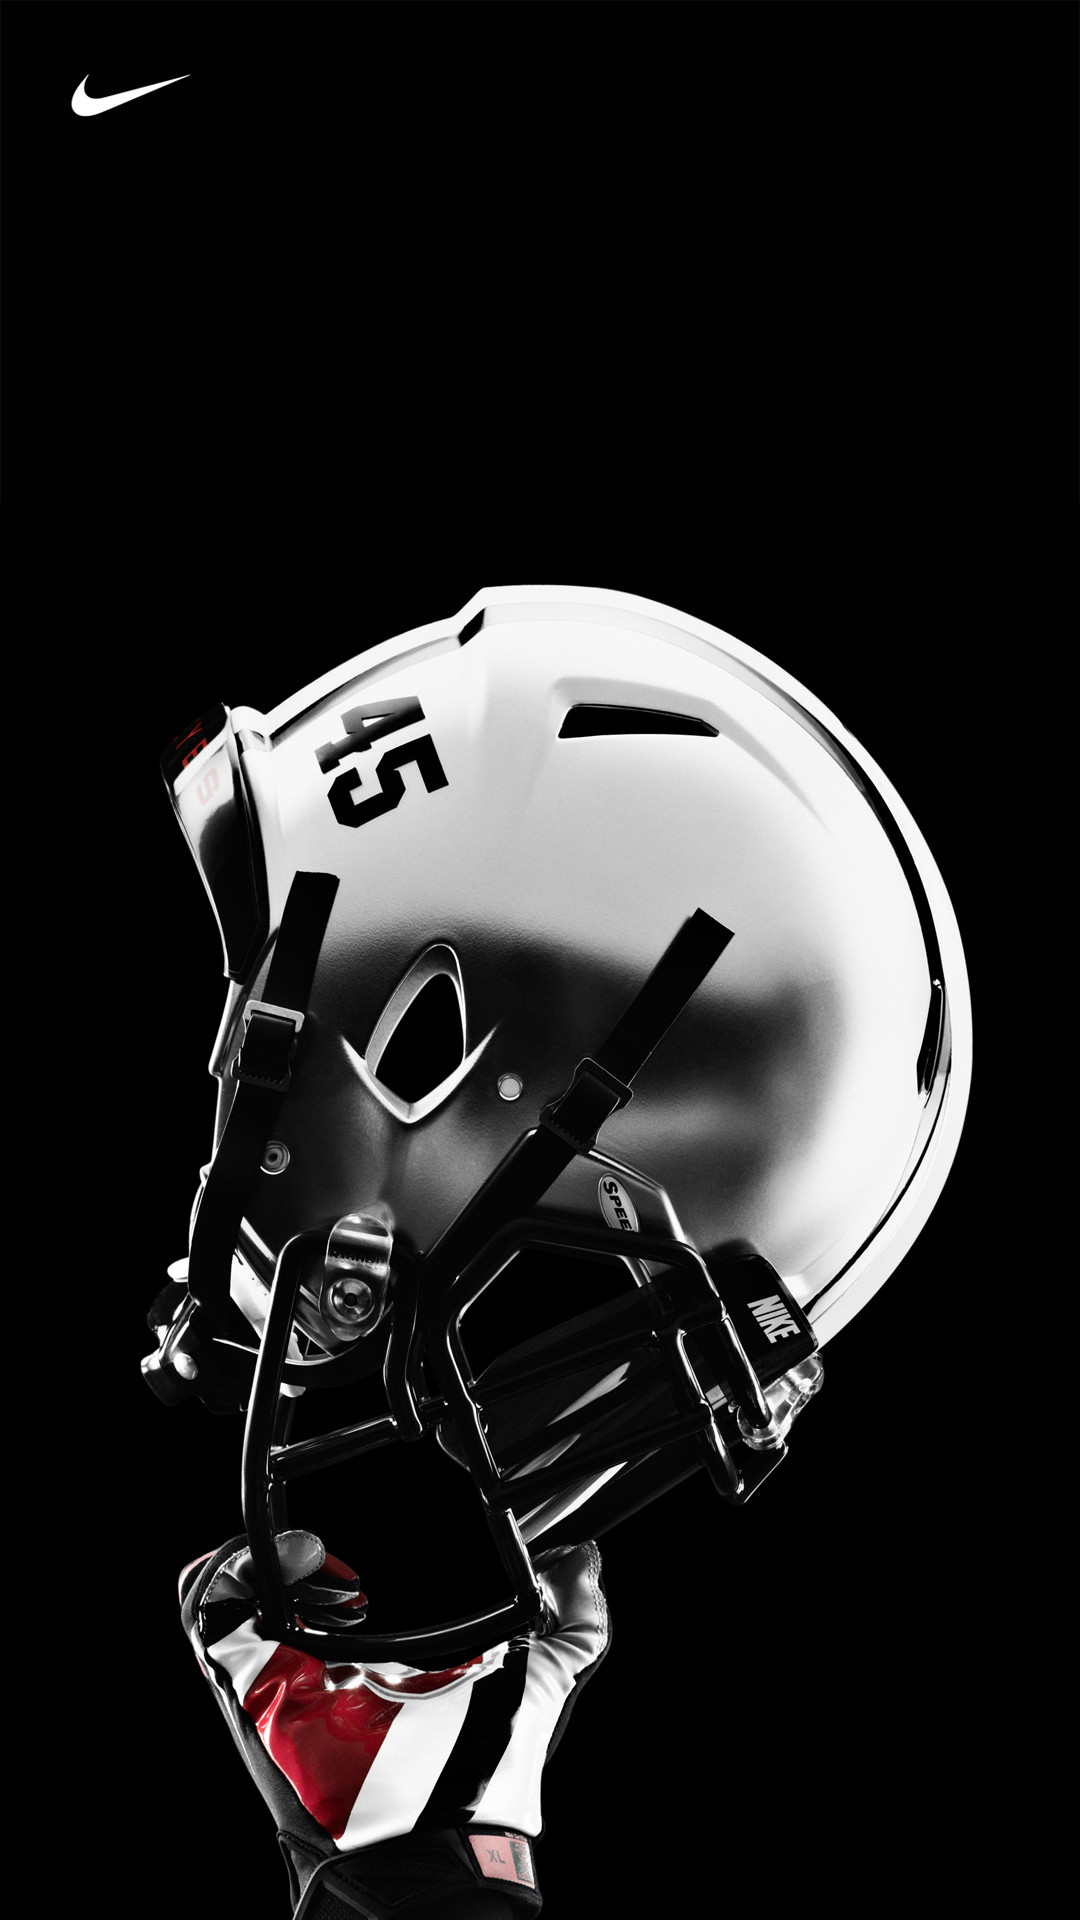 1080x1920 Ohio State Nike Pro Combat Football Uniform Best htc one wallpapers | HD  Wallpapers | Pinterest | Nike pro combat, Hd wallpaper and Wallpaper